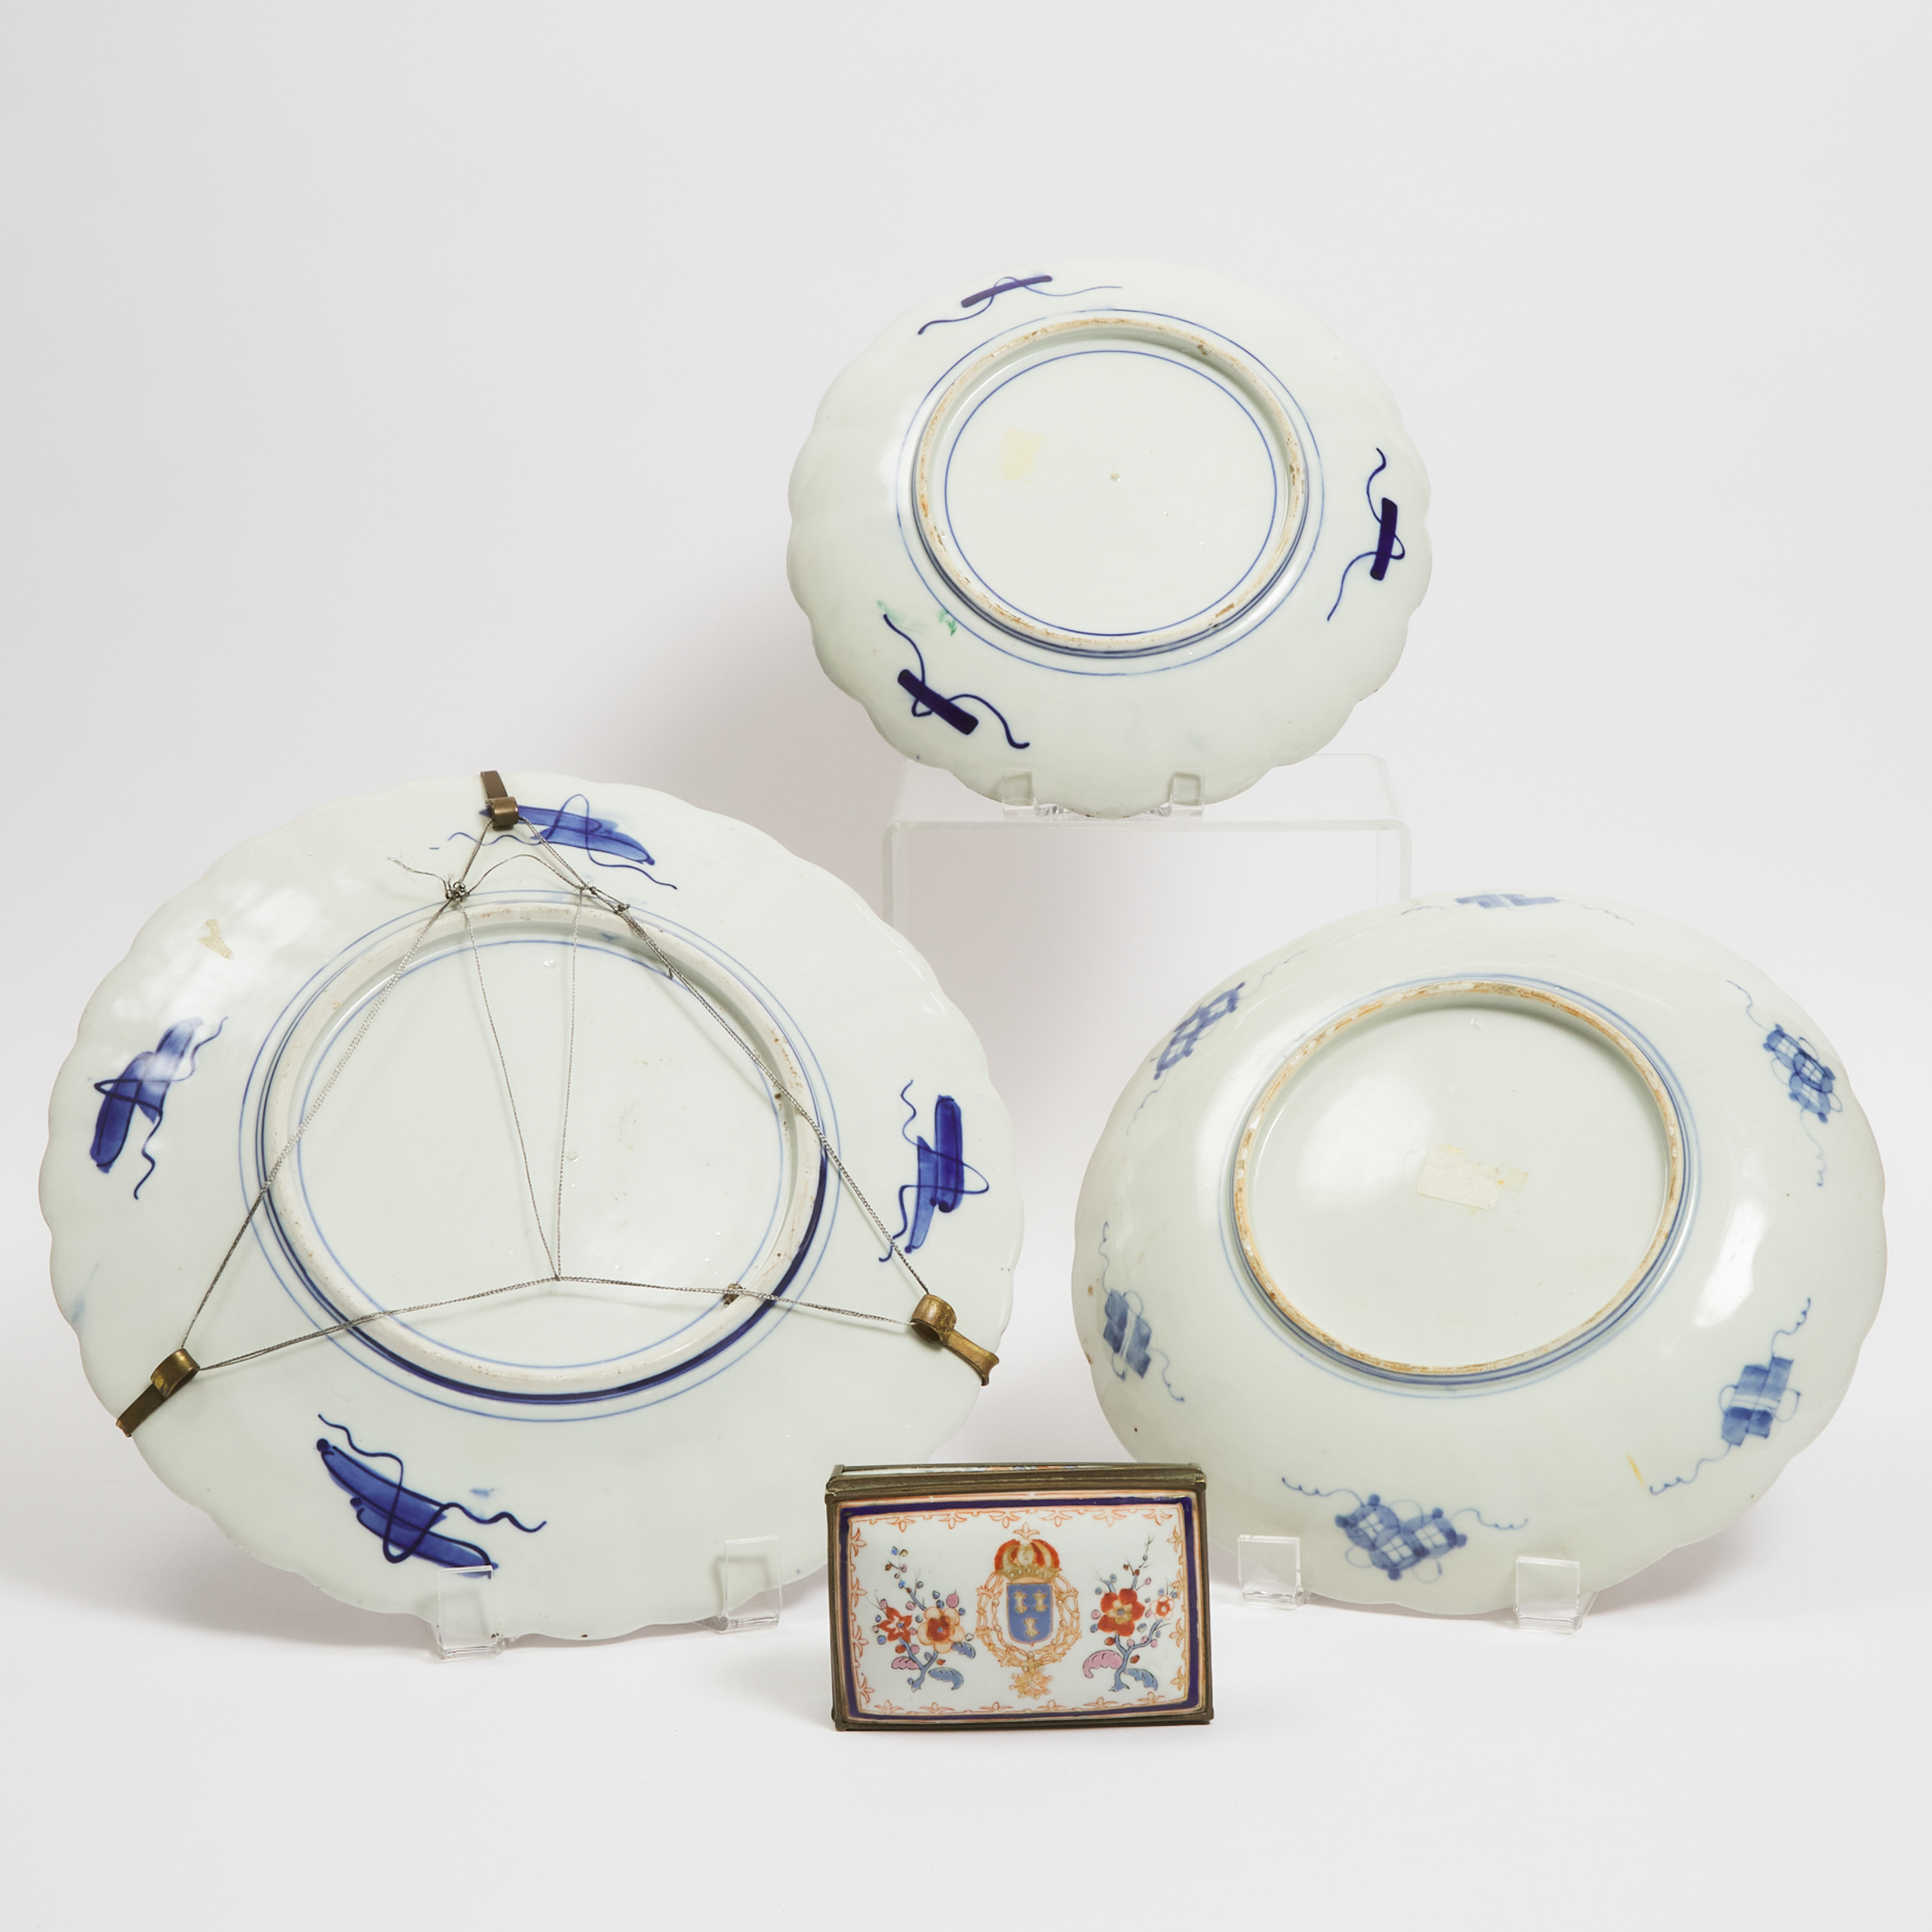 A Chinese Export Metal-Mounted Armorial Porcelain Box, Together With Three Japanese Imari Chargers, 18th/19th Century